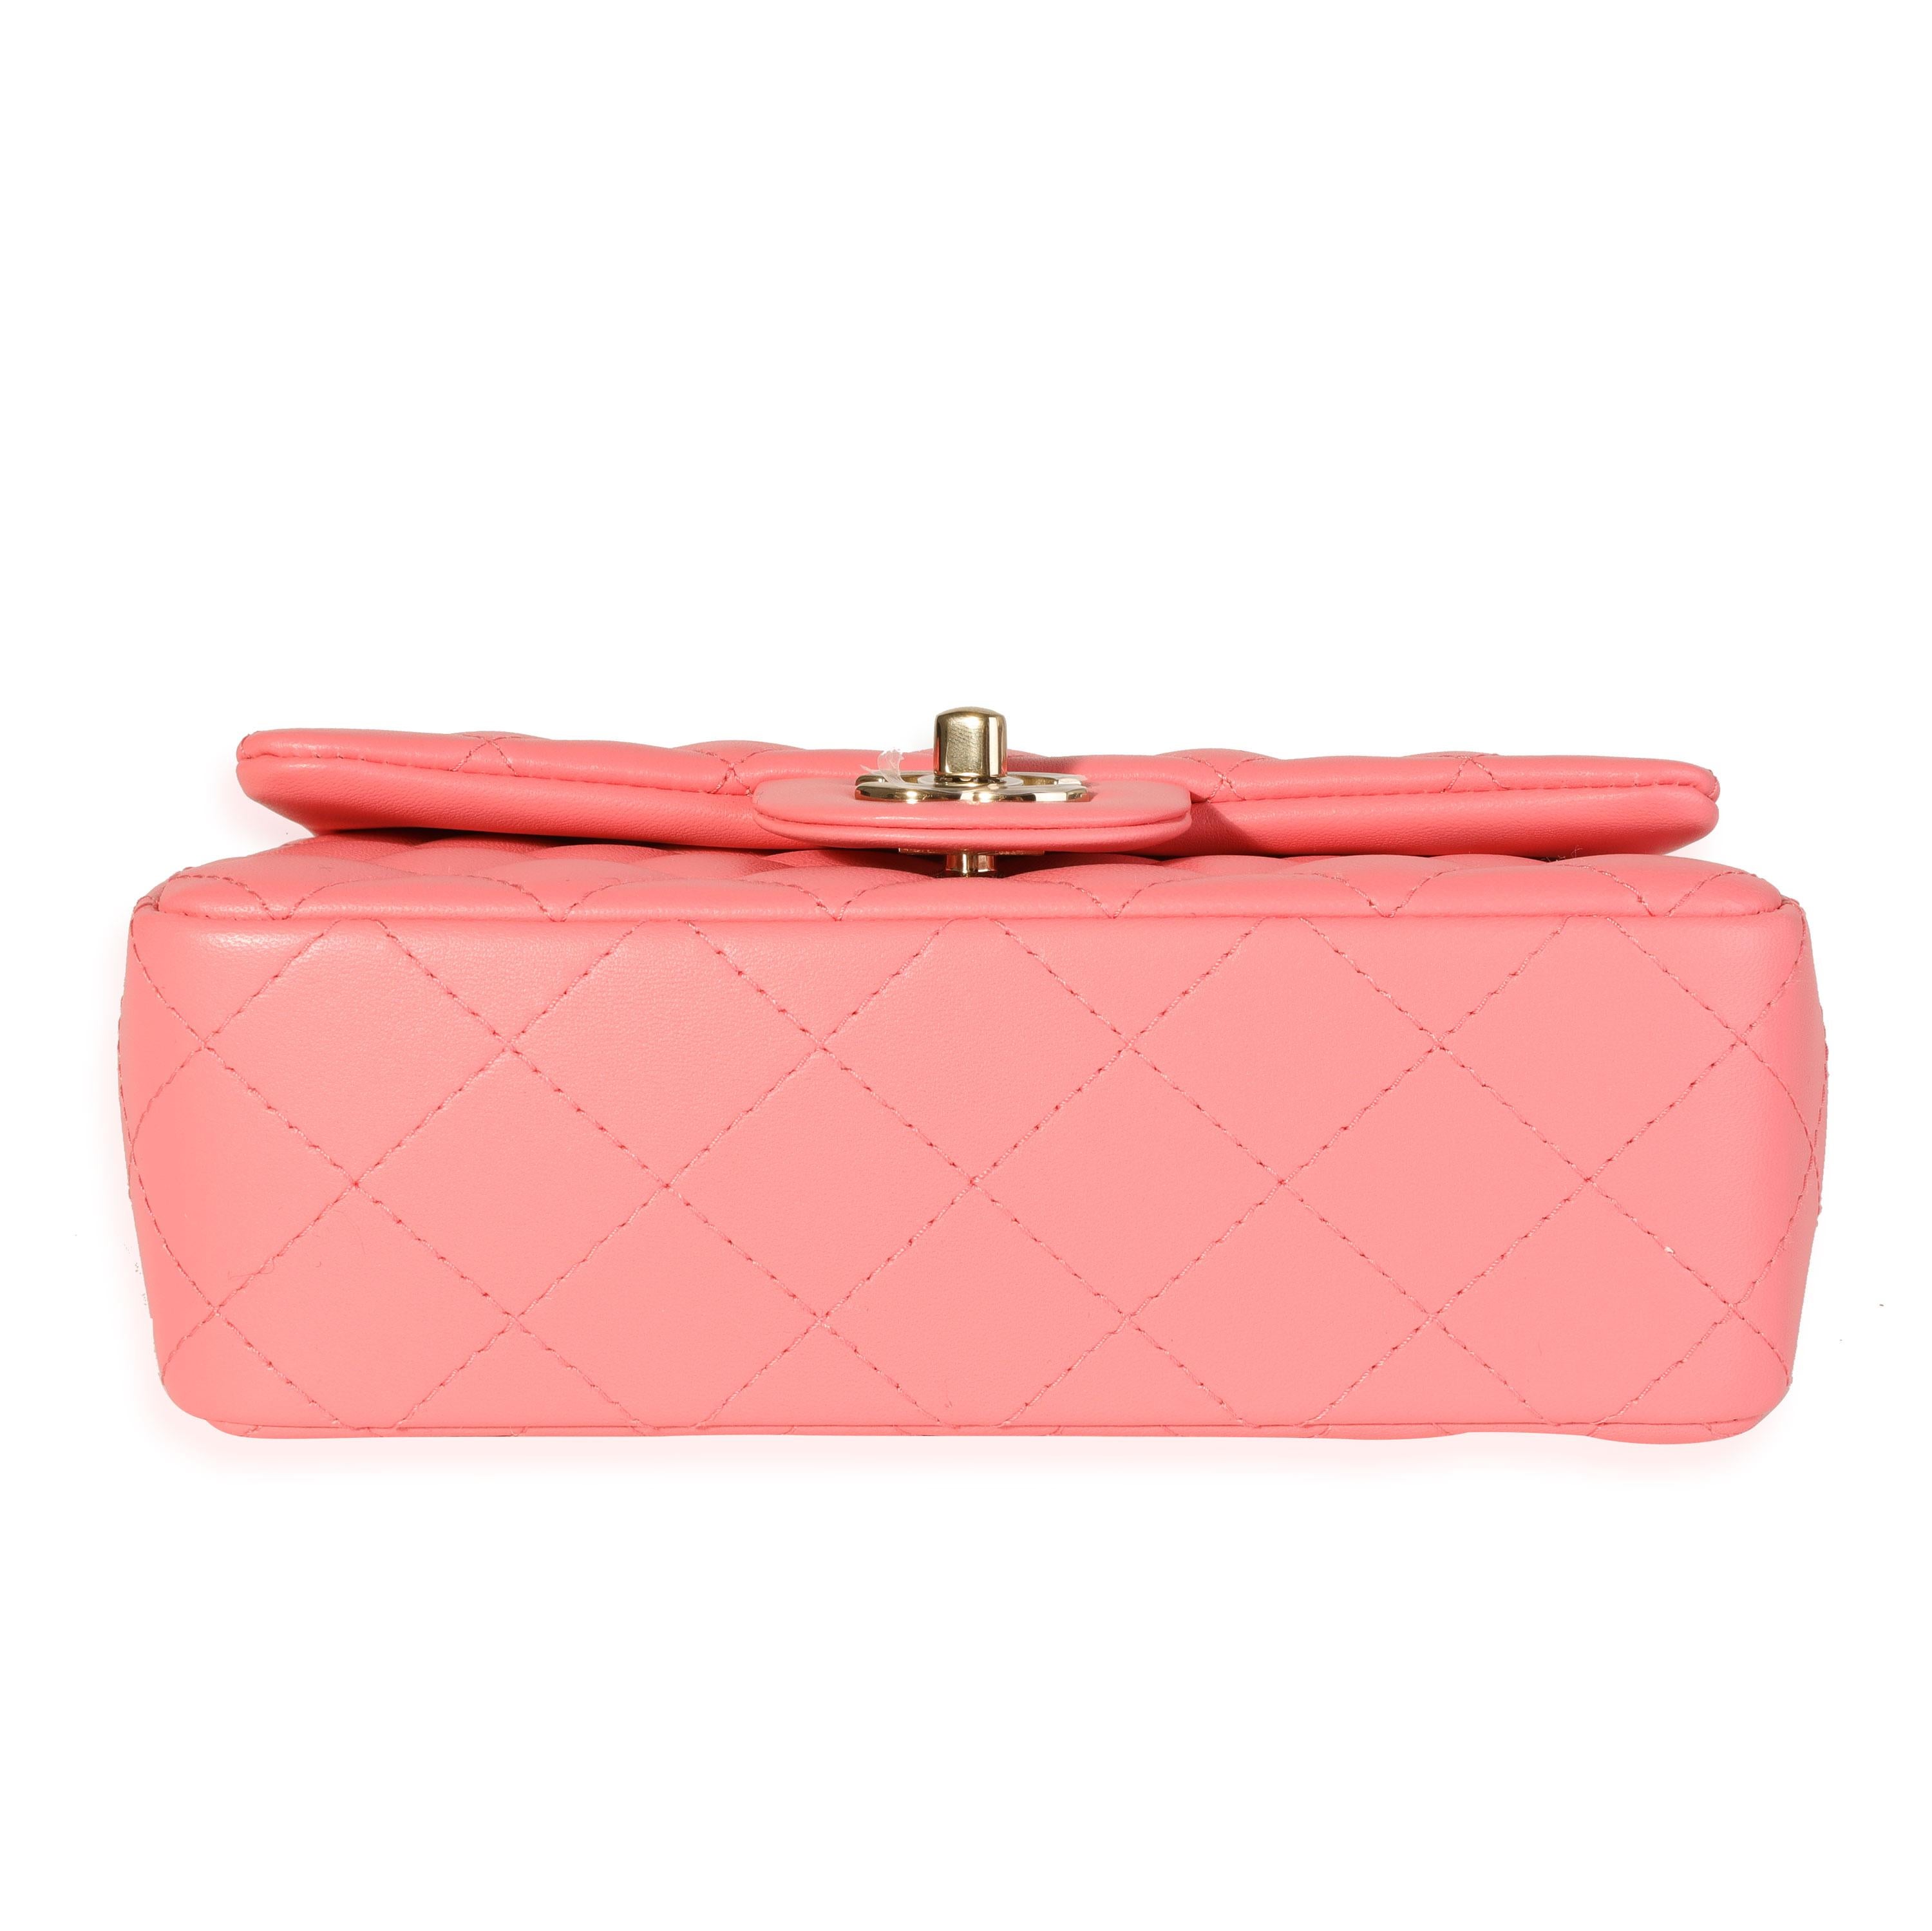 Chanel Pink Quilted Lambskin Rectangular Mini Classic Flap Bag 4